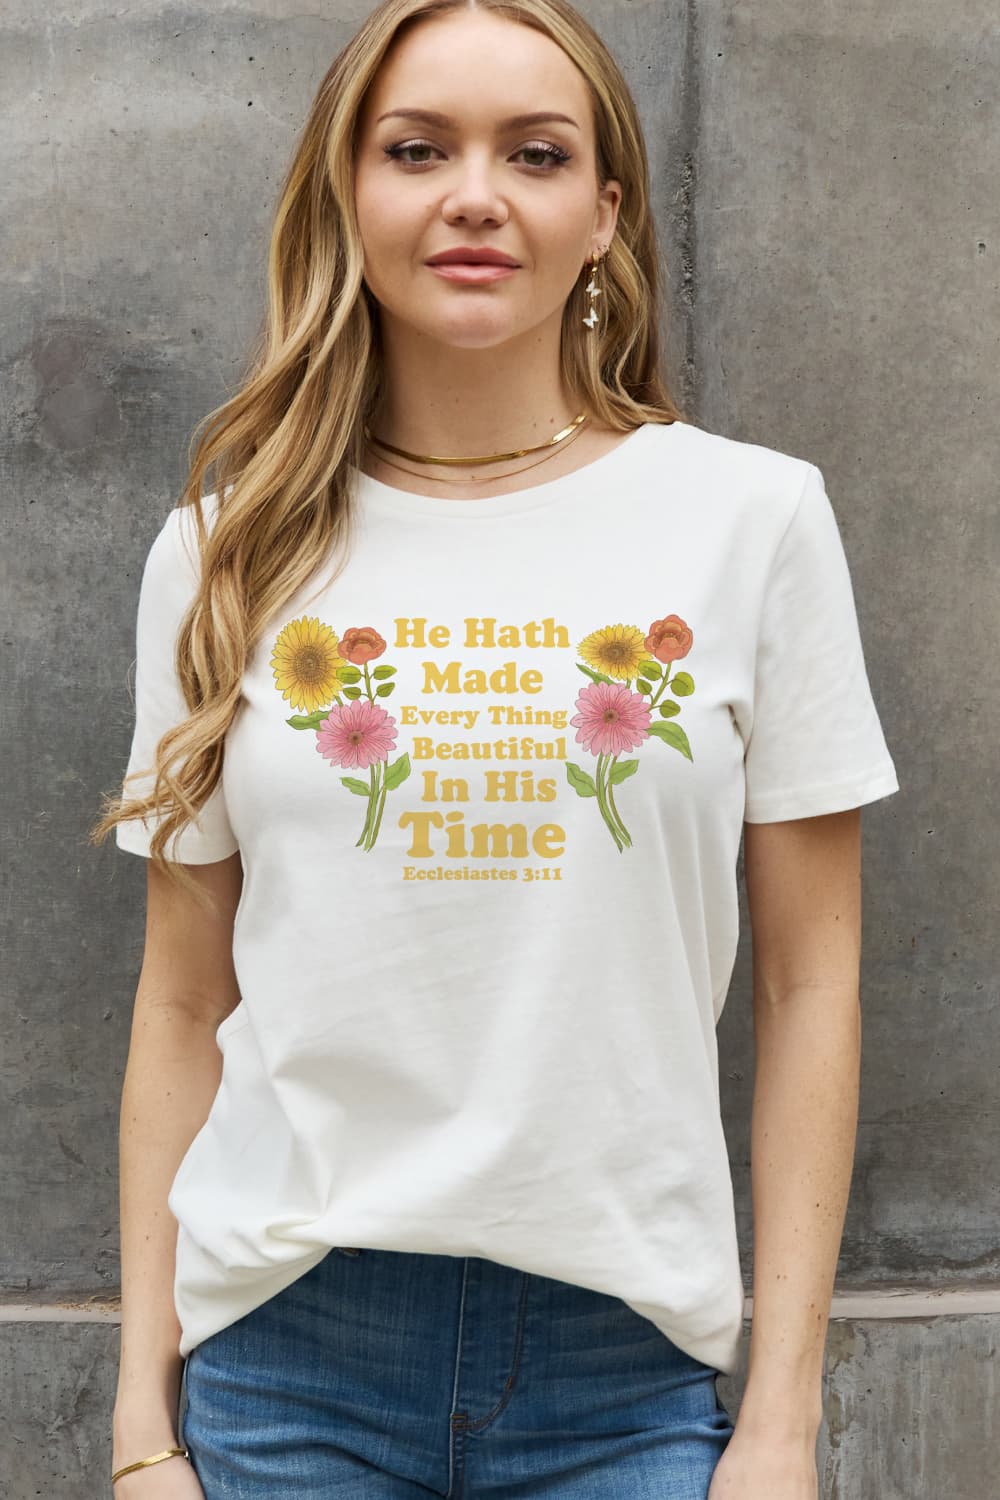 Women's Full Size He Hath Made Everything Beautiful in His Time Ecclesiastes 3:11 Graphic Cotton Tee Bleach